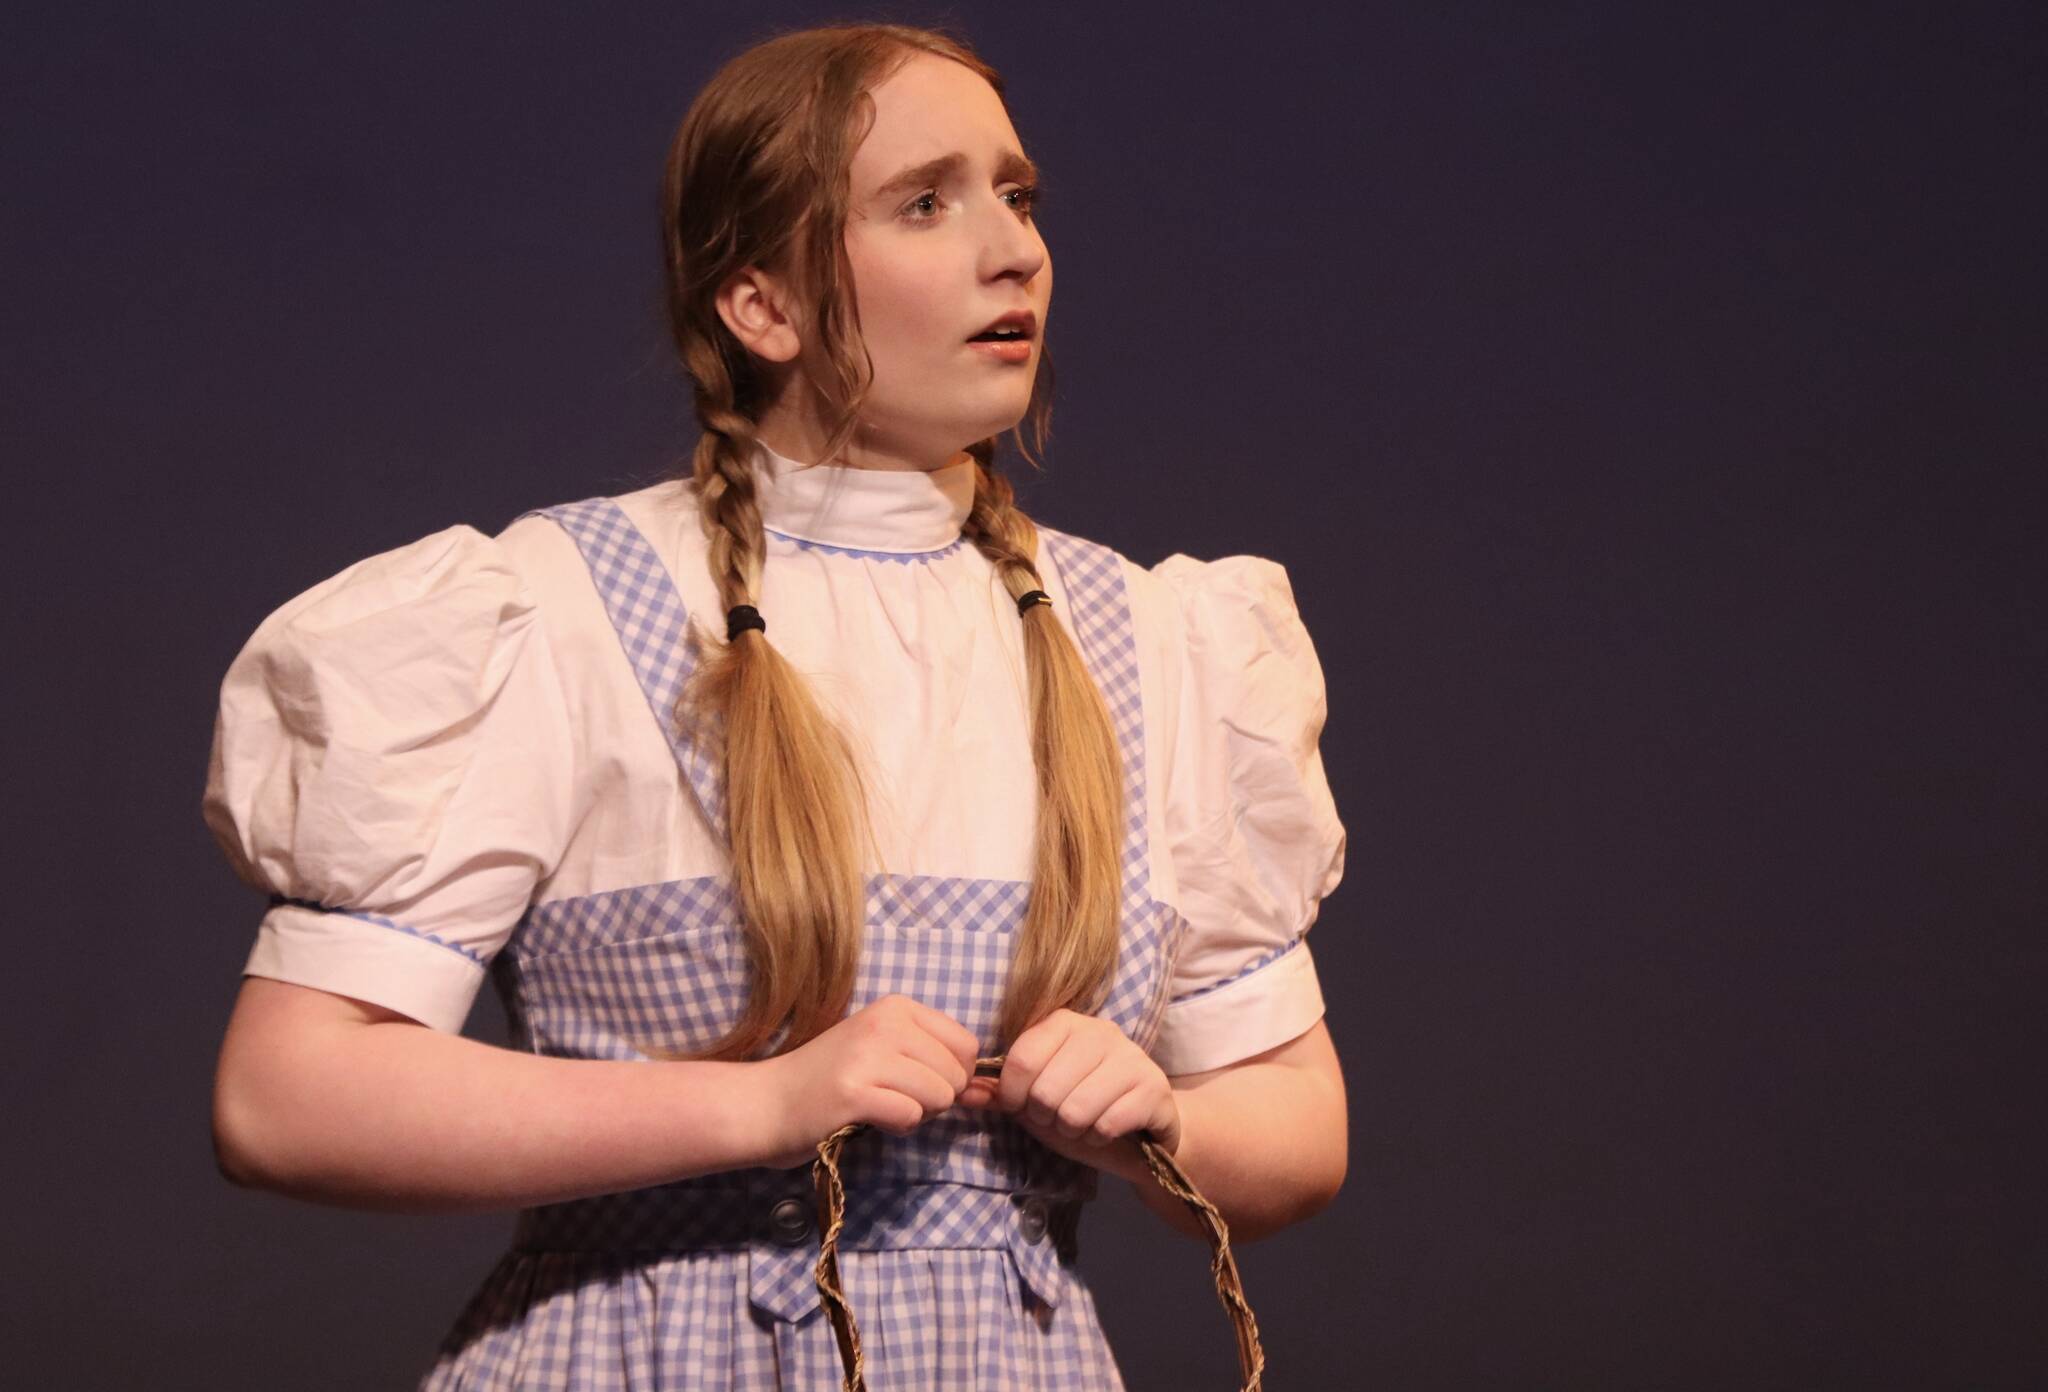 TMHS freshman Megan Peirce joins the case of “The Wizard of Oz” in the iconic role of Dorothy, now playing at the JDHS auditorium until Saturday, May 6. (Jonson Kuhn / Juneau Empire)